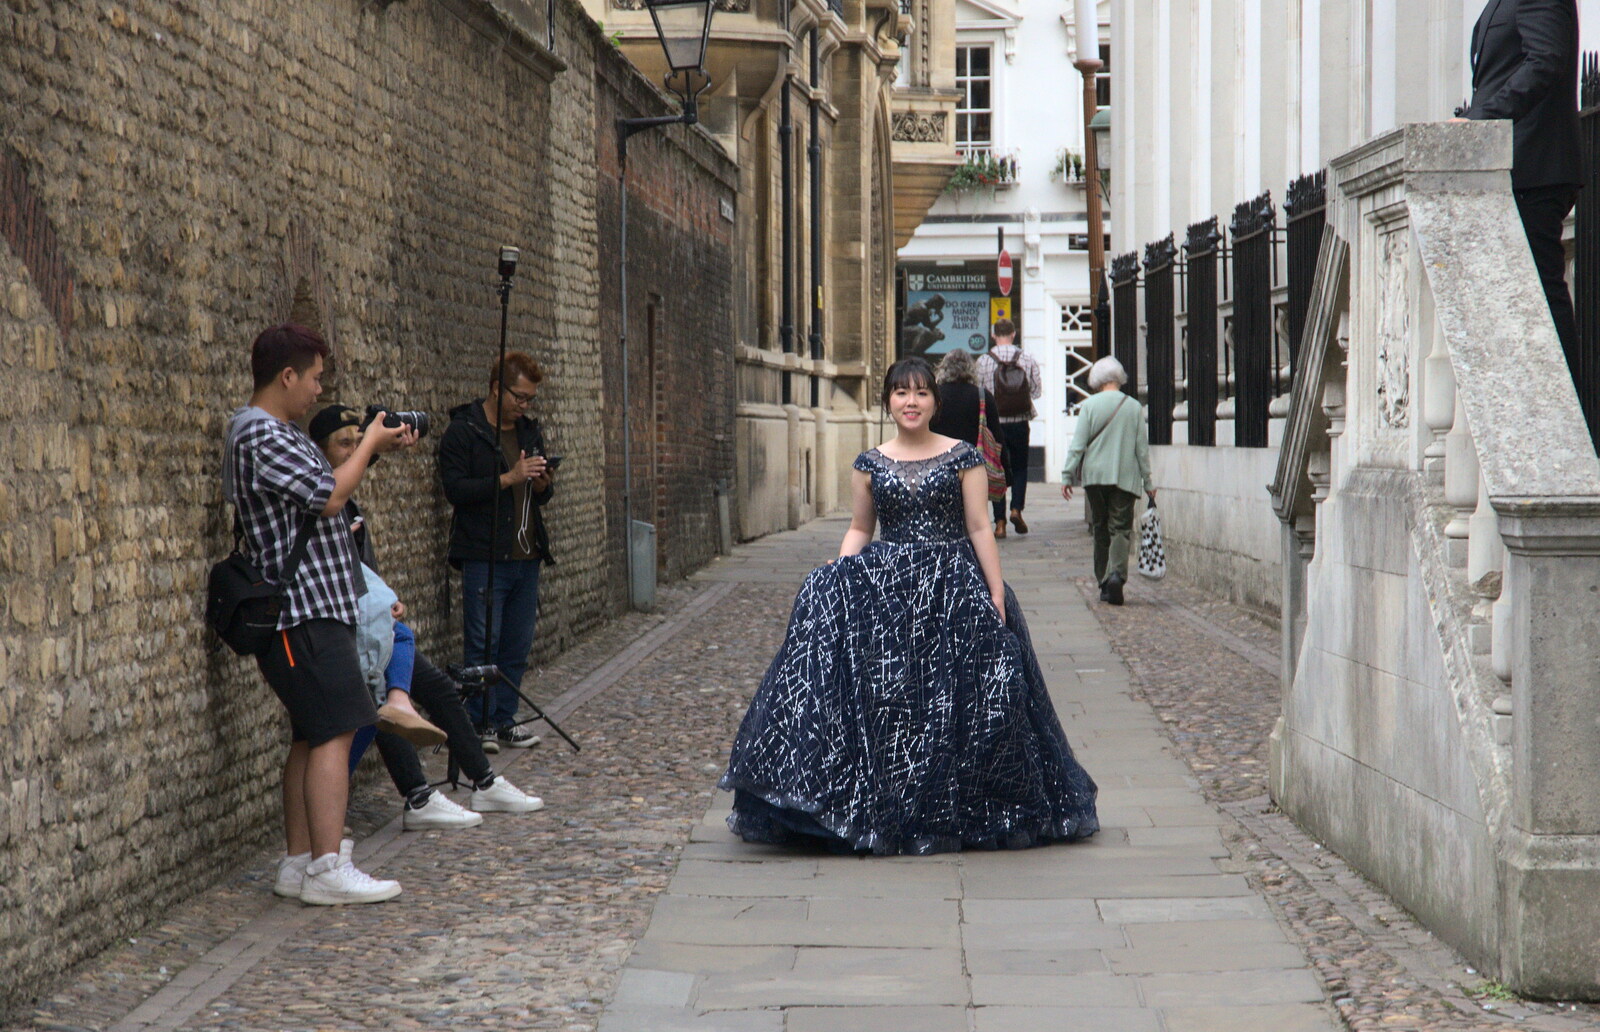 There's a photo-shoot on Senate House Passage from The Retro Computer Festival, Centre For Computing History, Cambridge - 15th September 2018